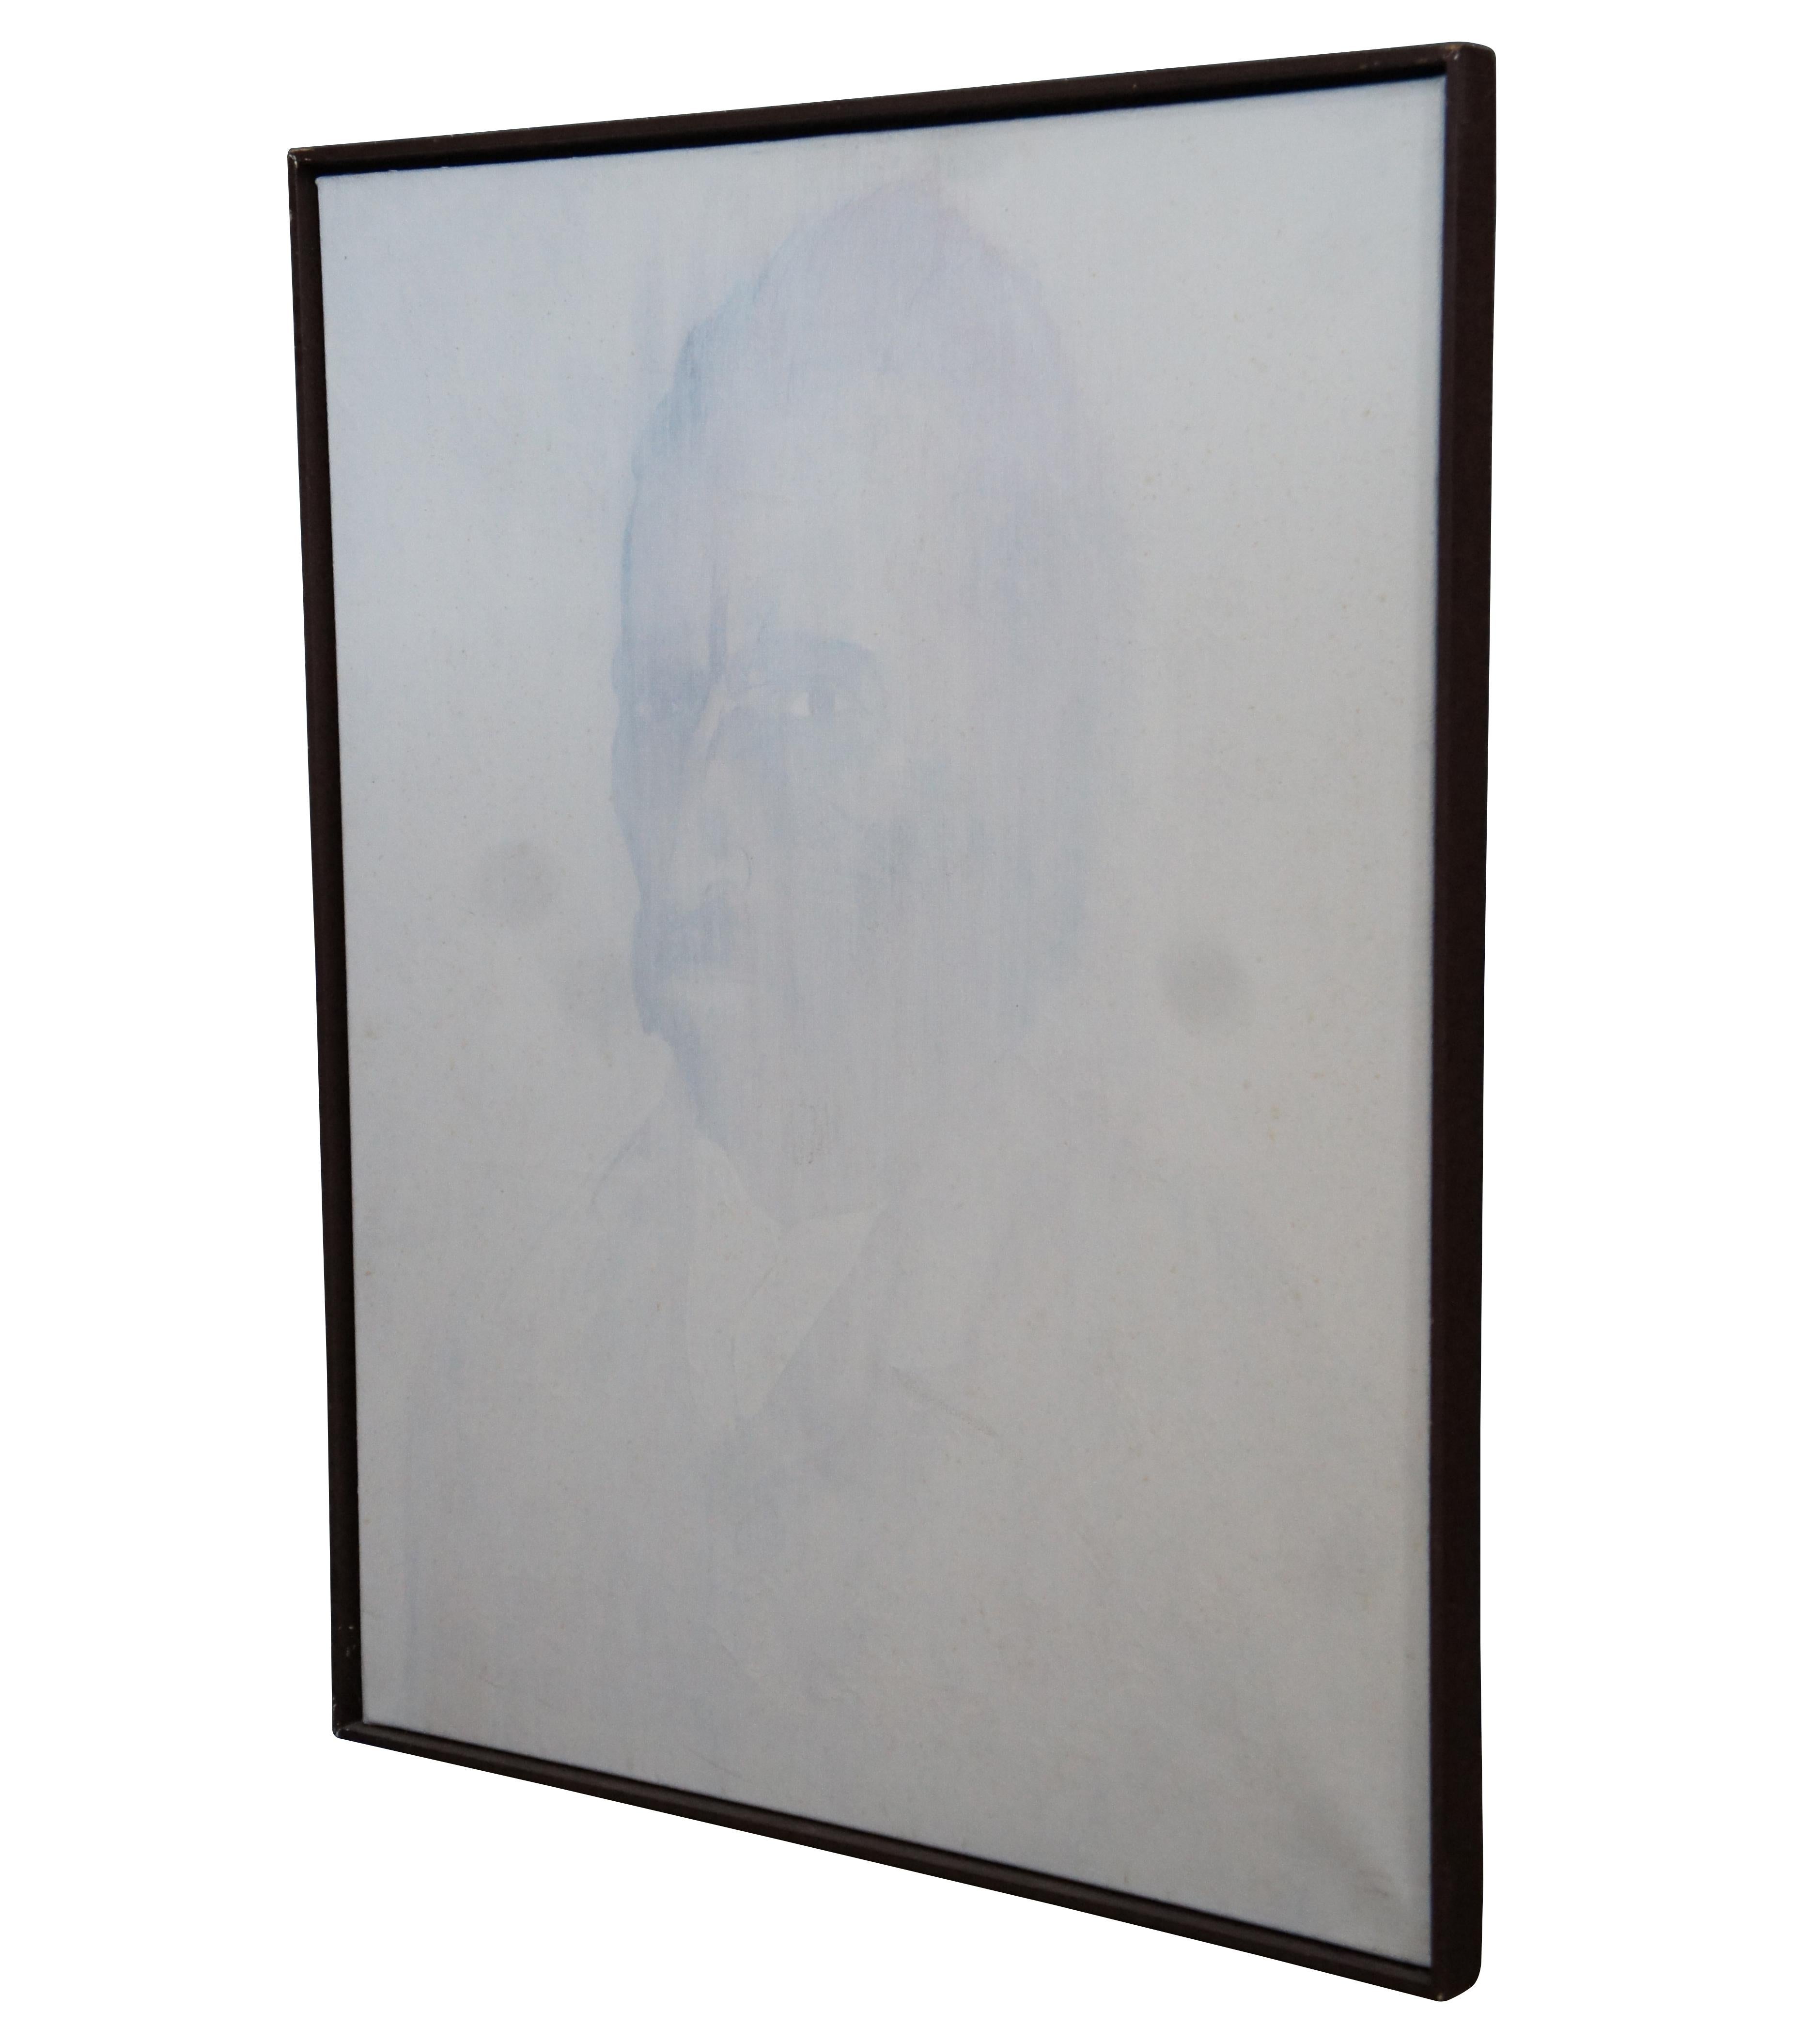 A unique modern portrait painting on burlap of Vincent van Gogh, with a white wash finish / overlay. Signed and dated by artist on verso.

Measures: 32.5” x 1.75” x 40.5” / Sans Frame - 31.5” x 39.5” (width x depth x height).